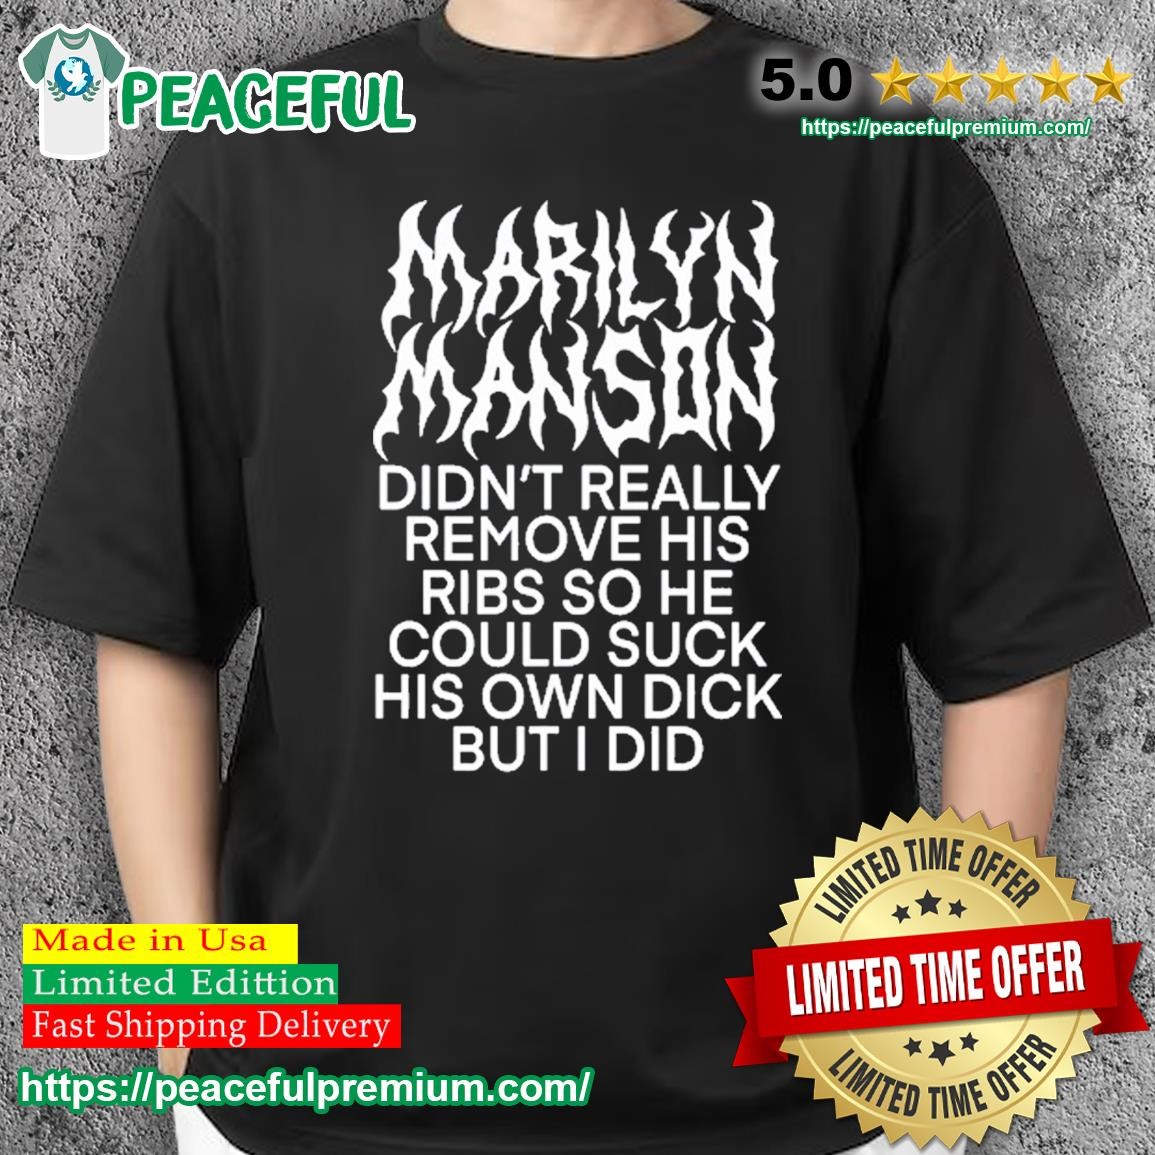 Marilyn Manson Didn't Really Remove His Ribs So He Could Suck His Own Dick But I Did Shirt